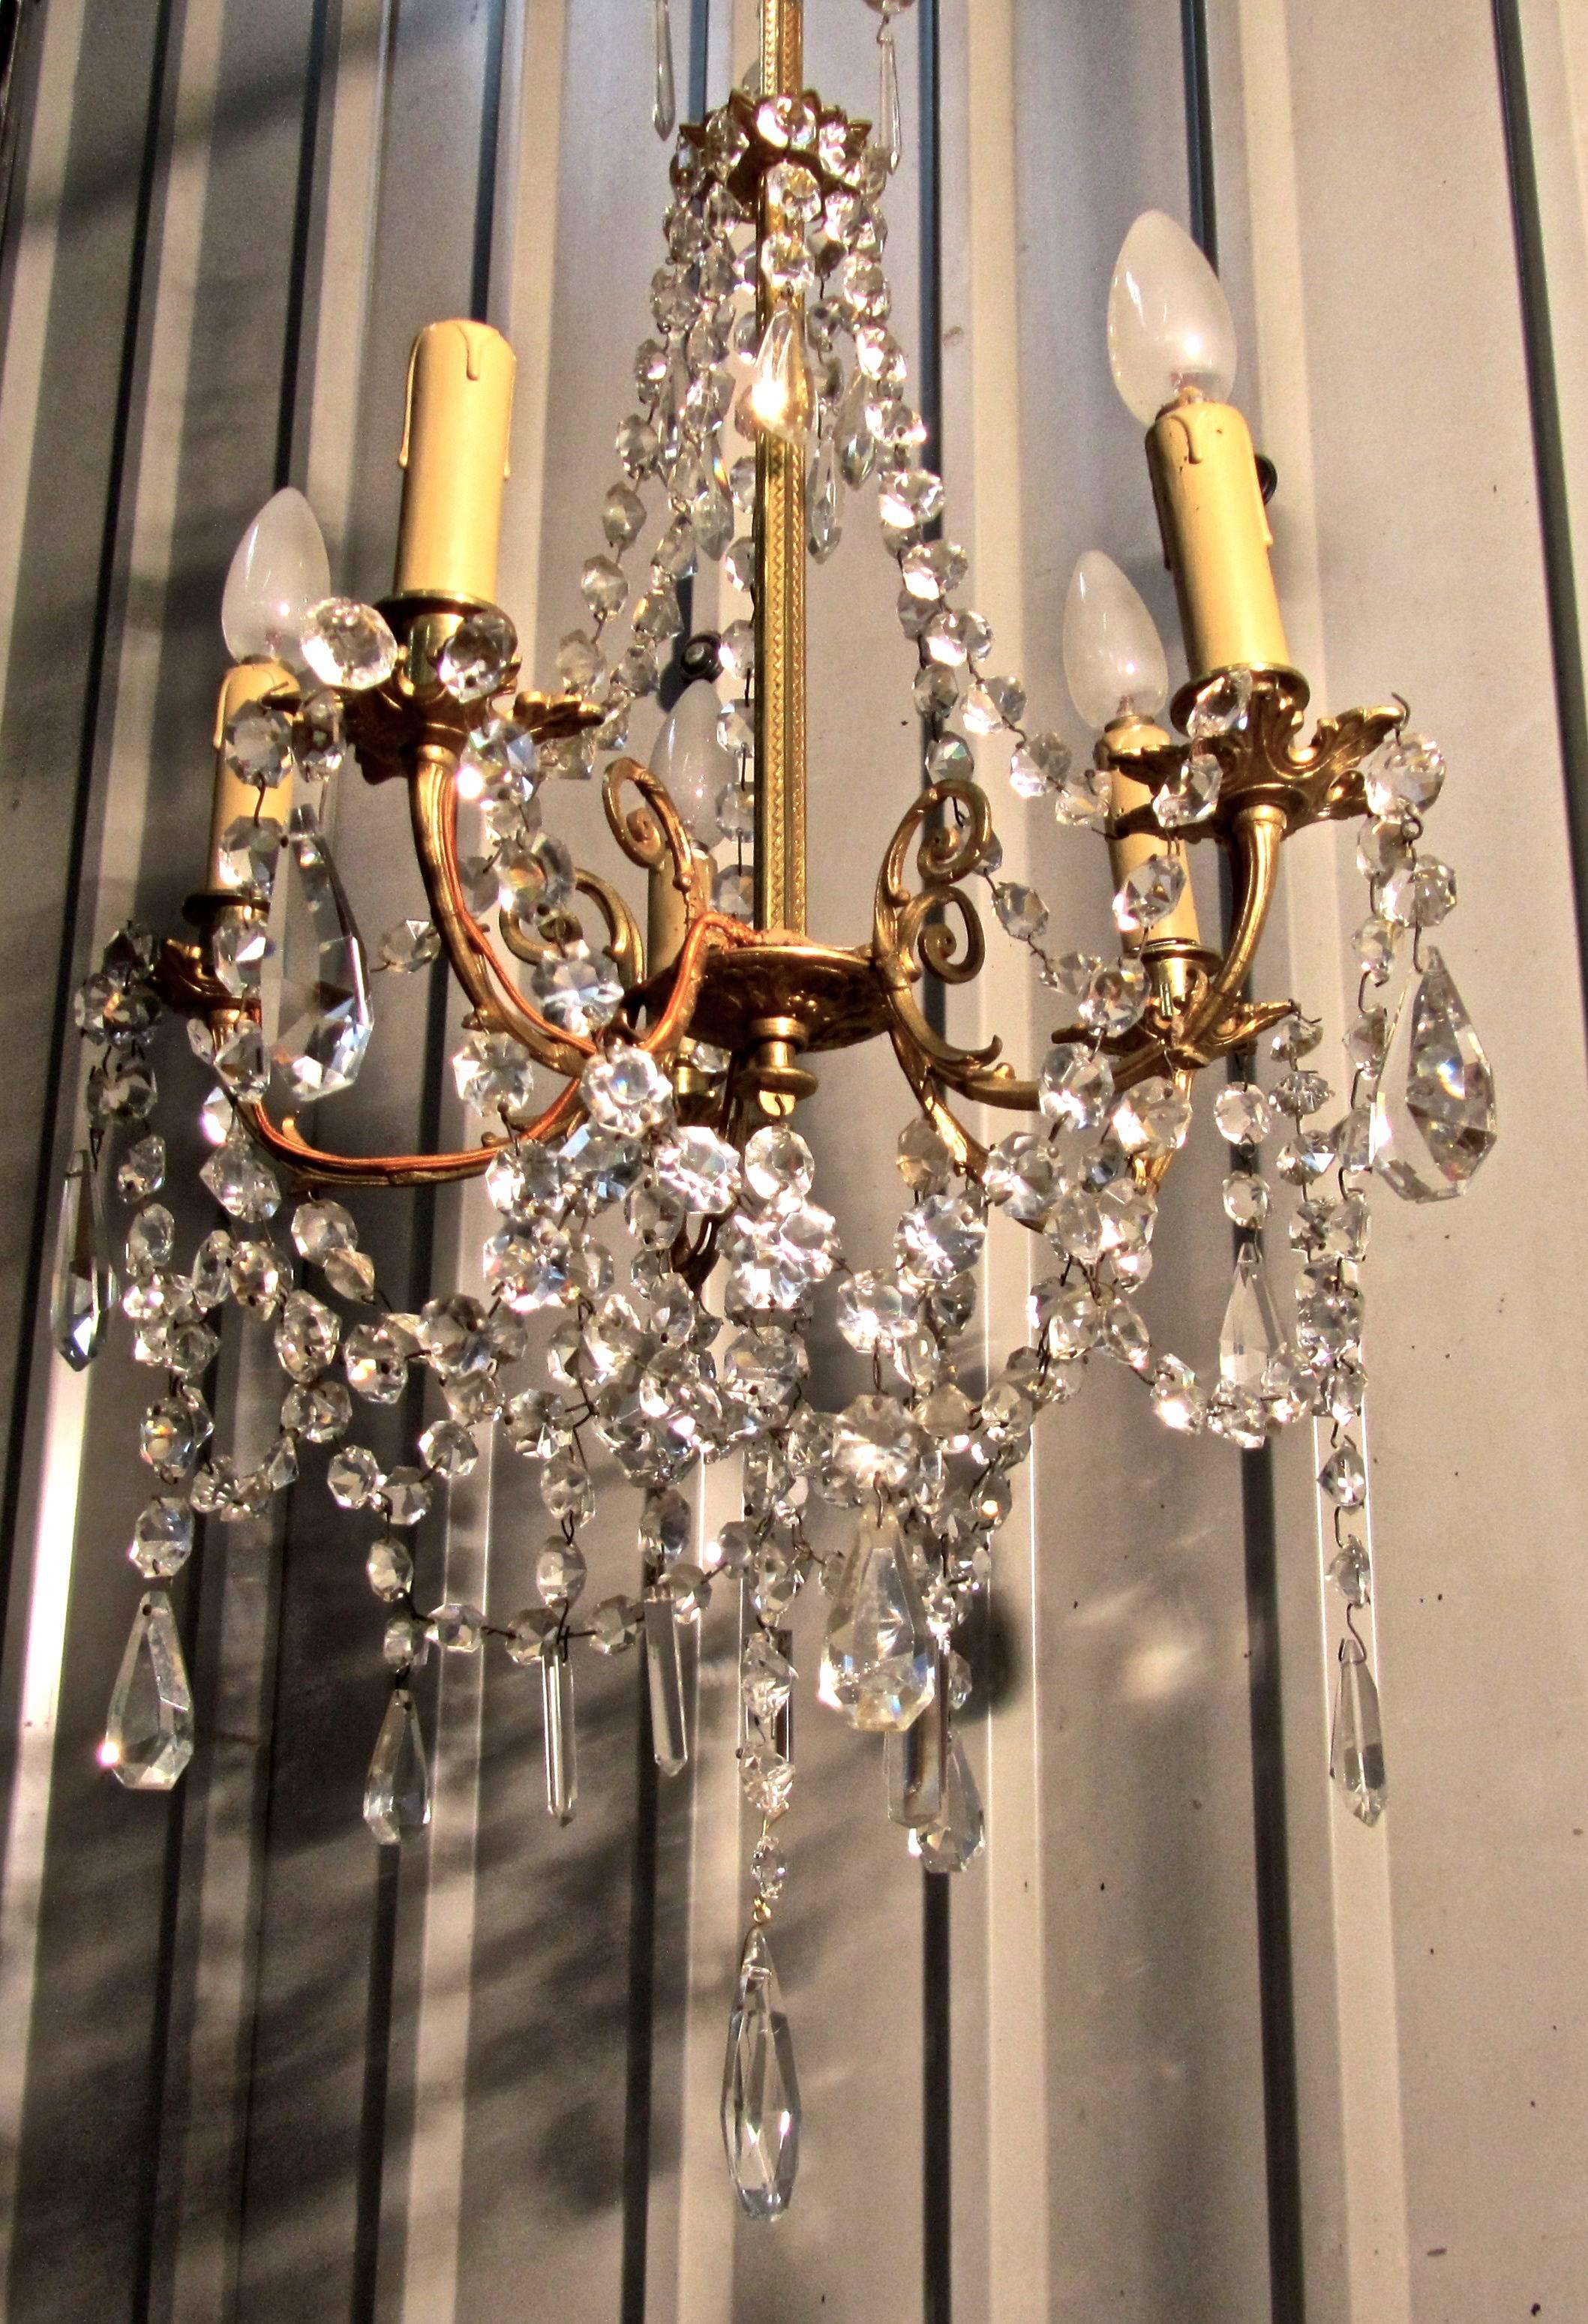 A charming and large French cut glass and brass five branch chandelier.

This is an excellent quality piece, the decorated brass centre column supports the scrolling branches, the five arms are hung with many strings of beads and flat cut glass